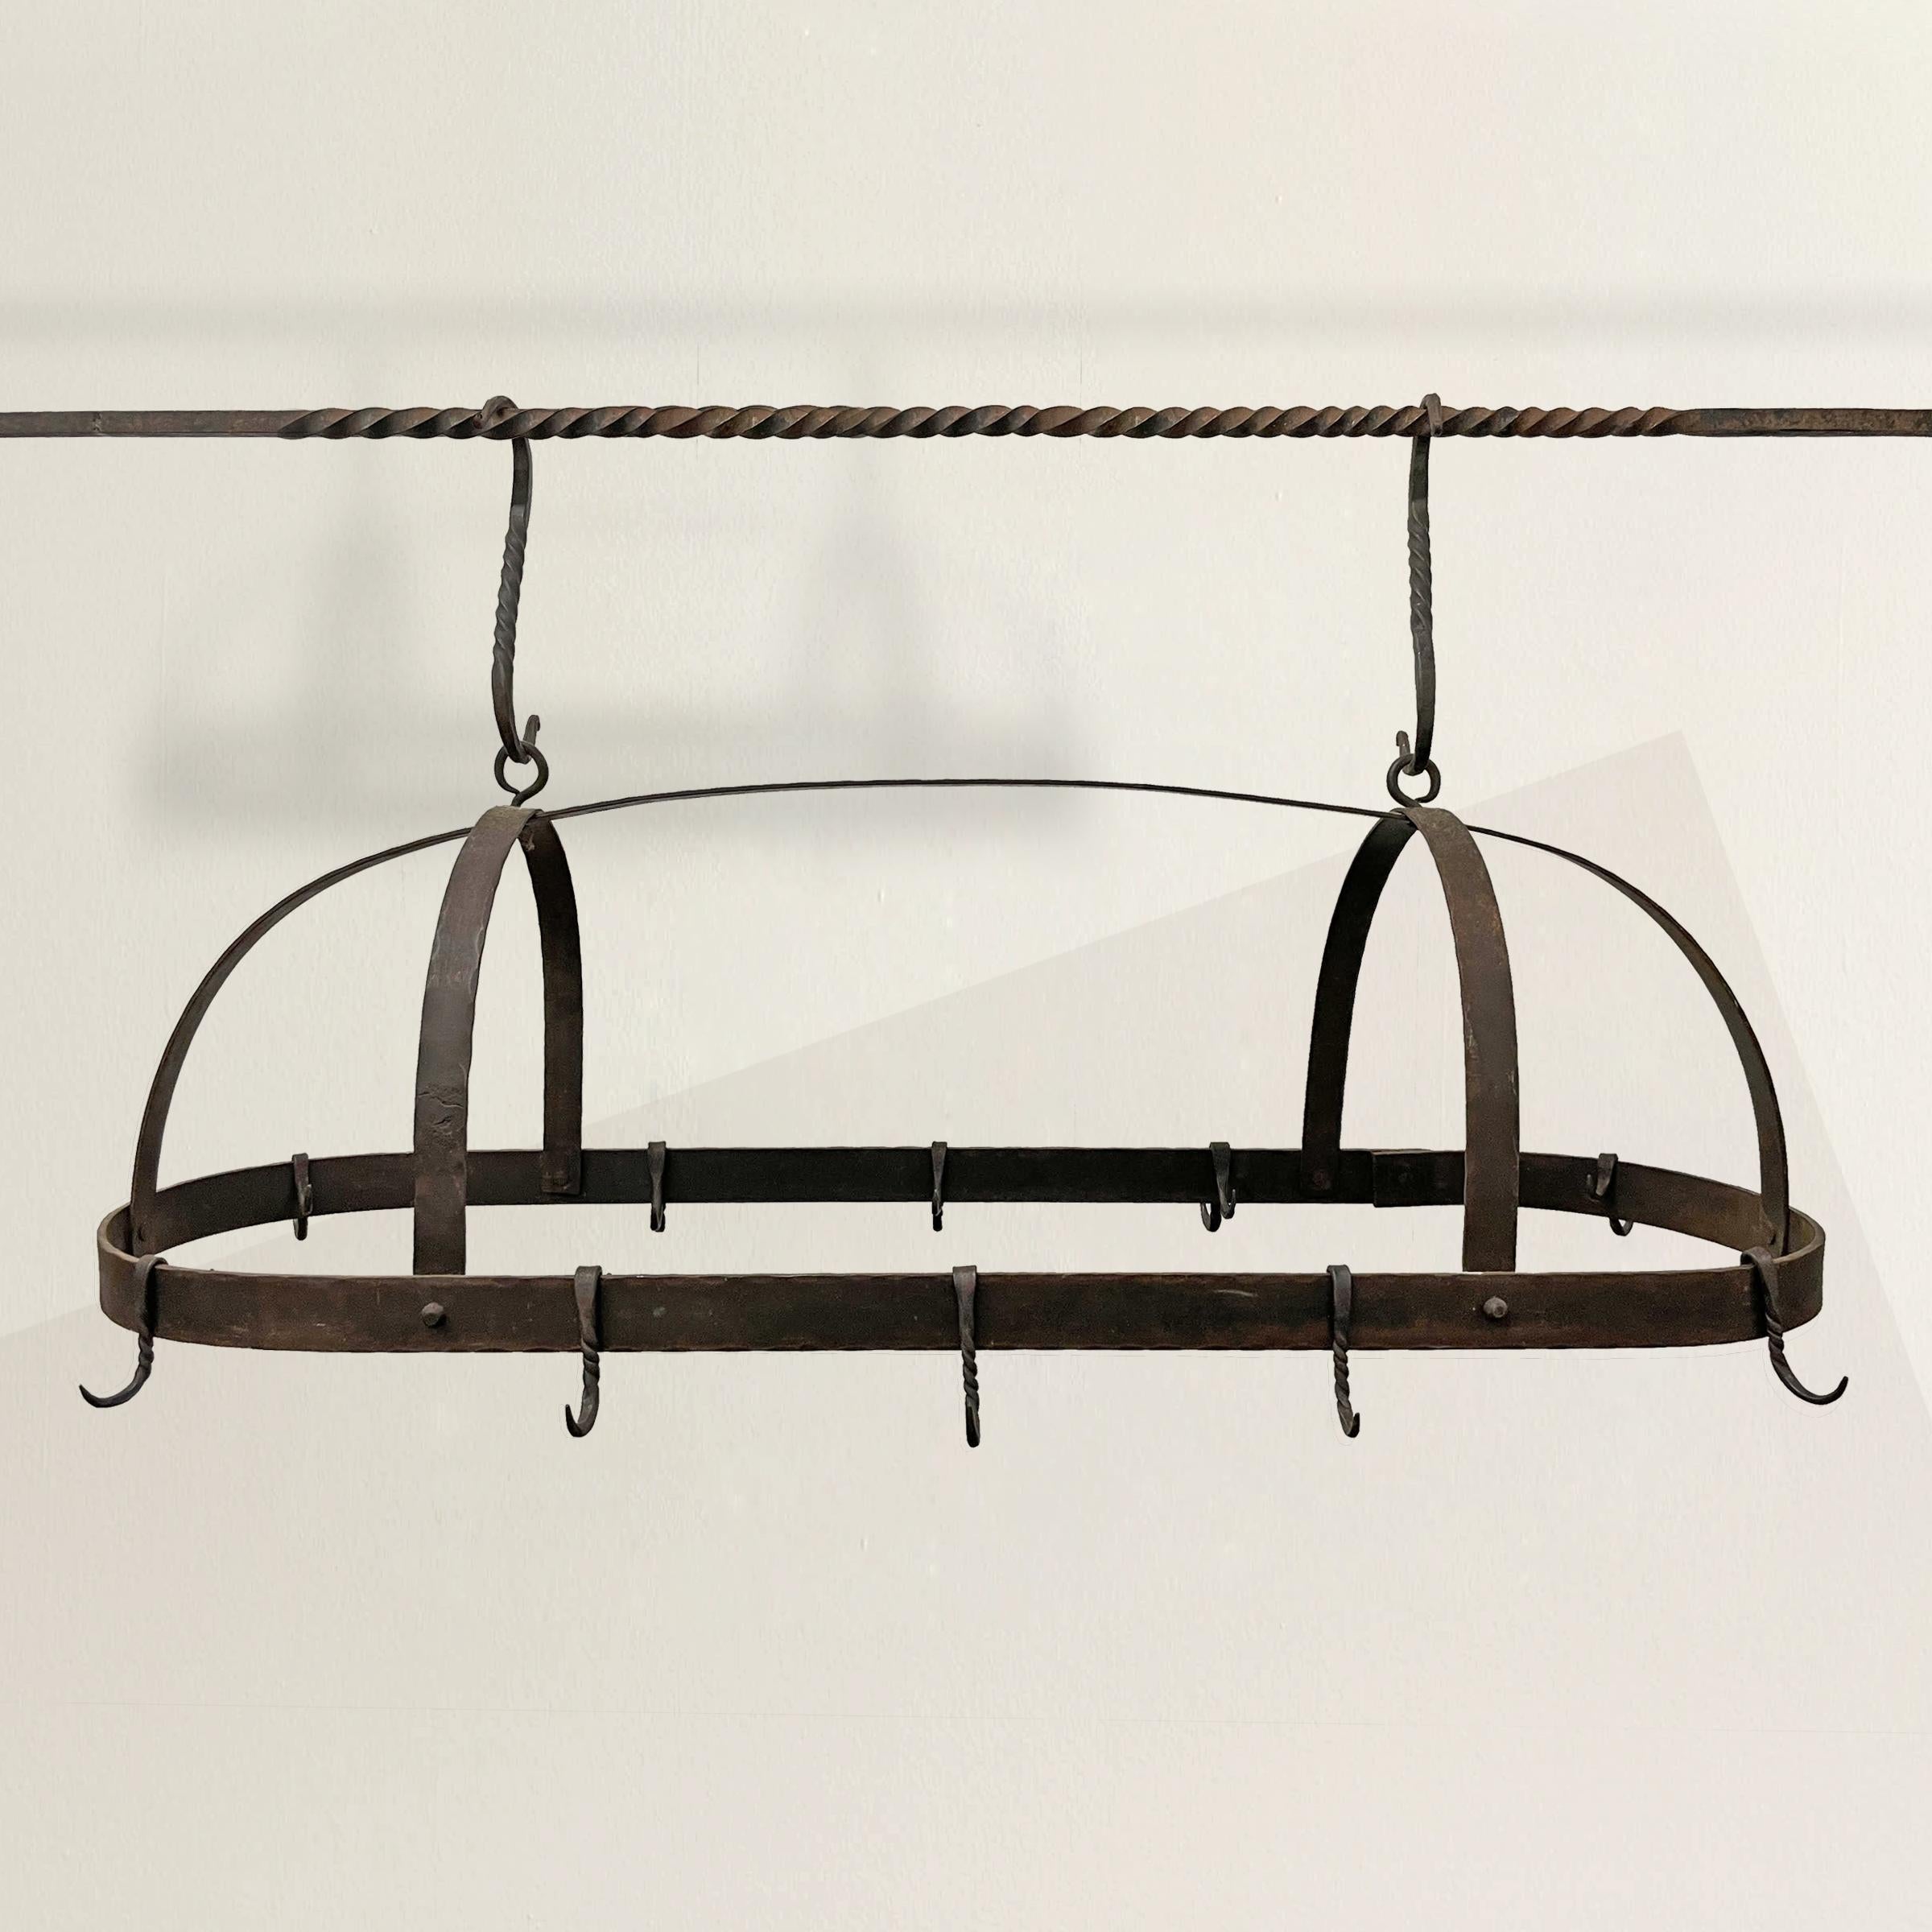 An wonderful early 20th century American hand-wrought iron pot rack constructed from several flat iron bars that are shaped into a rack, and suspended by two large wrought iron twisted S hooks, and two double-hooks each containing a hook on the